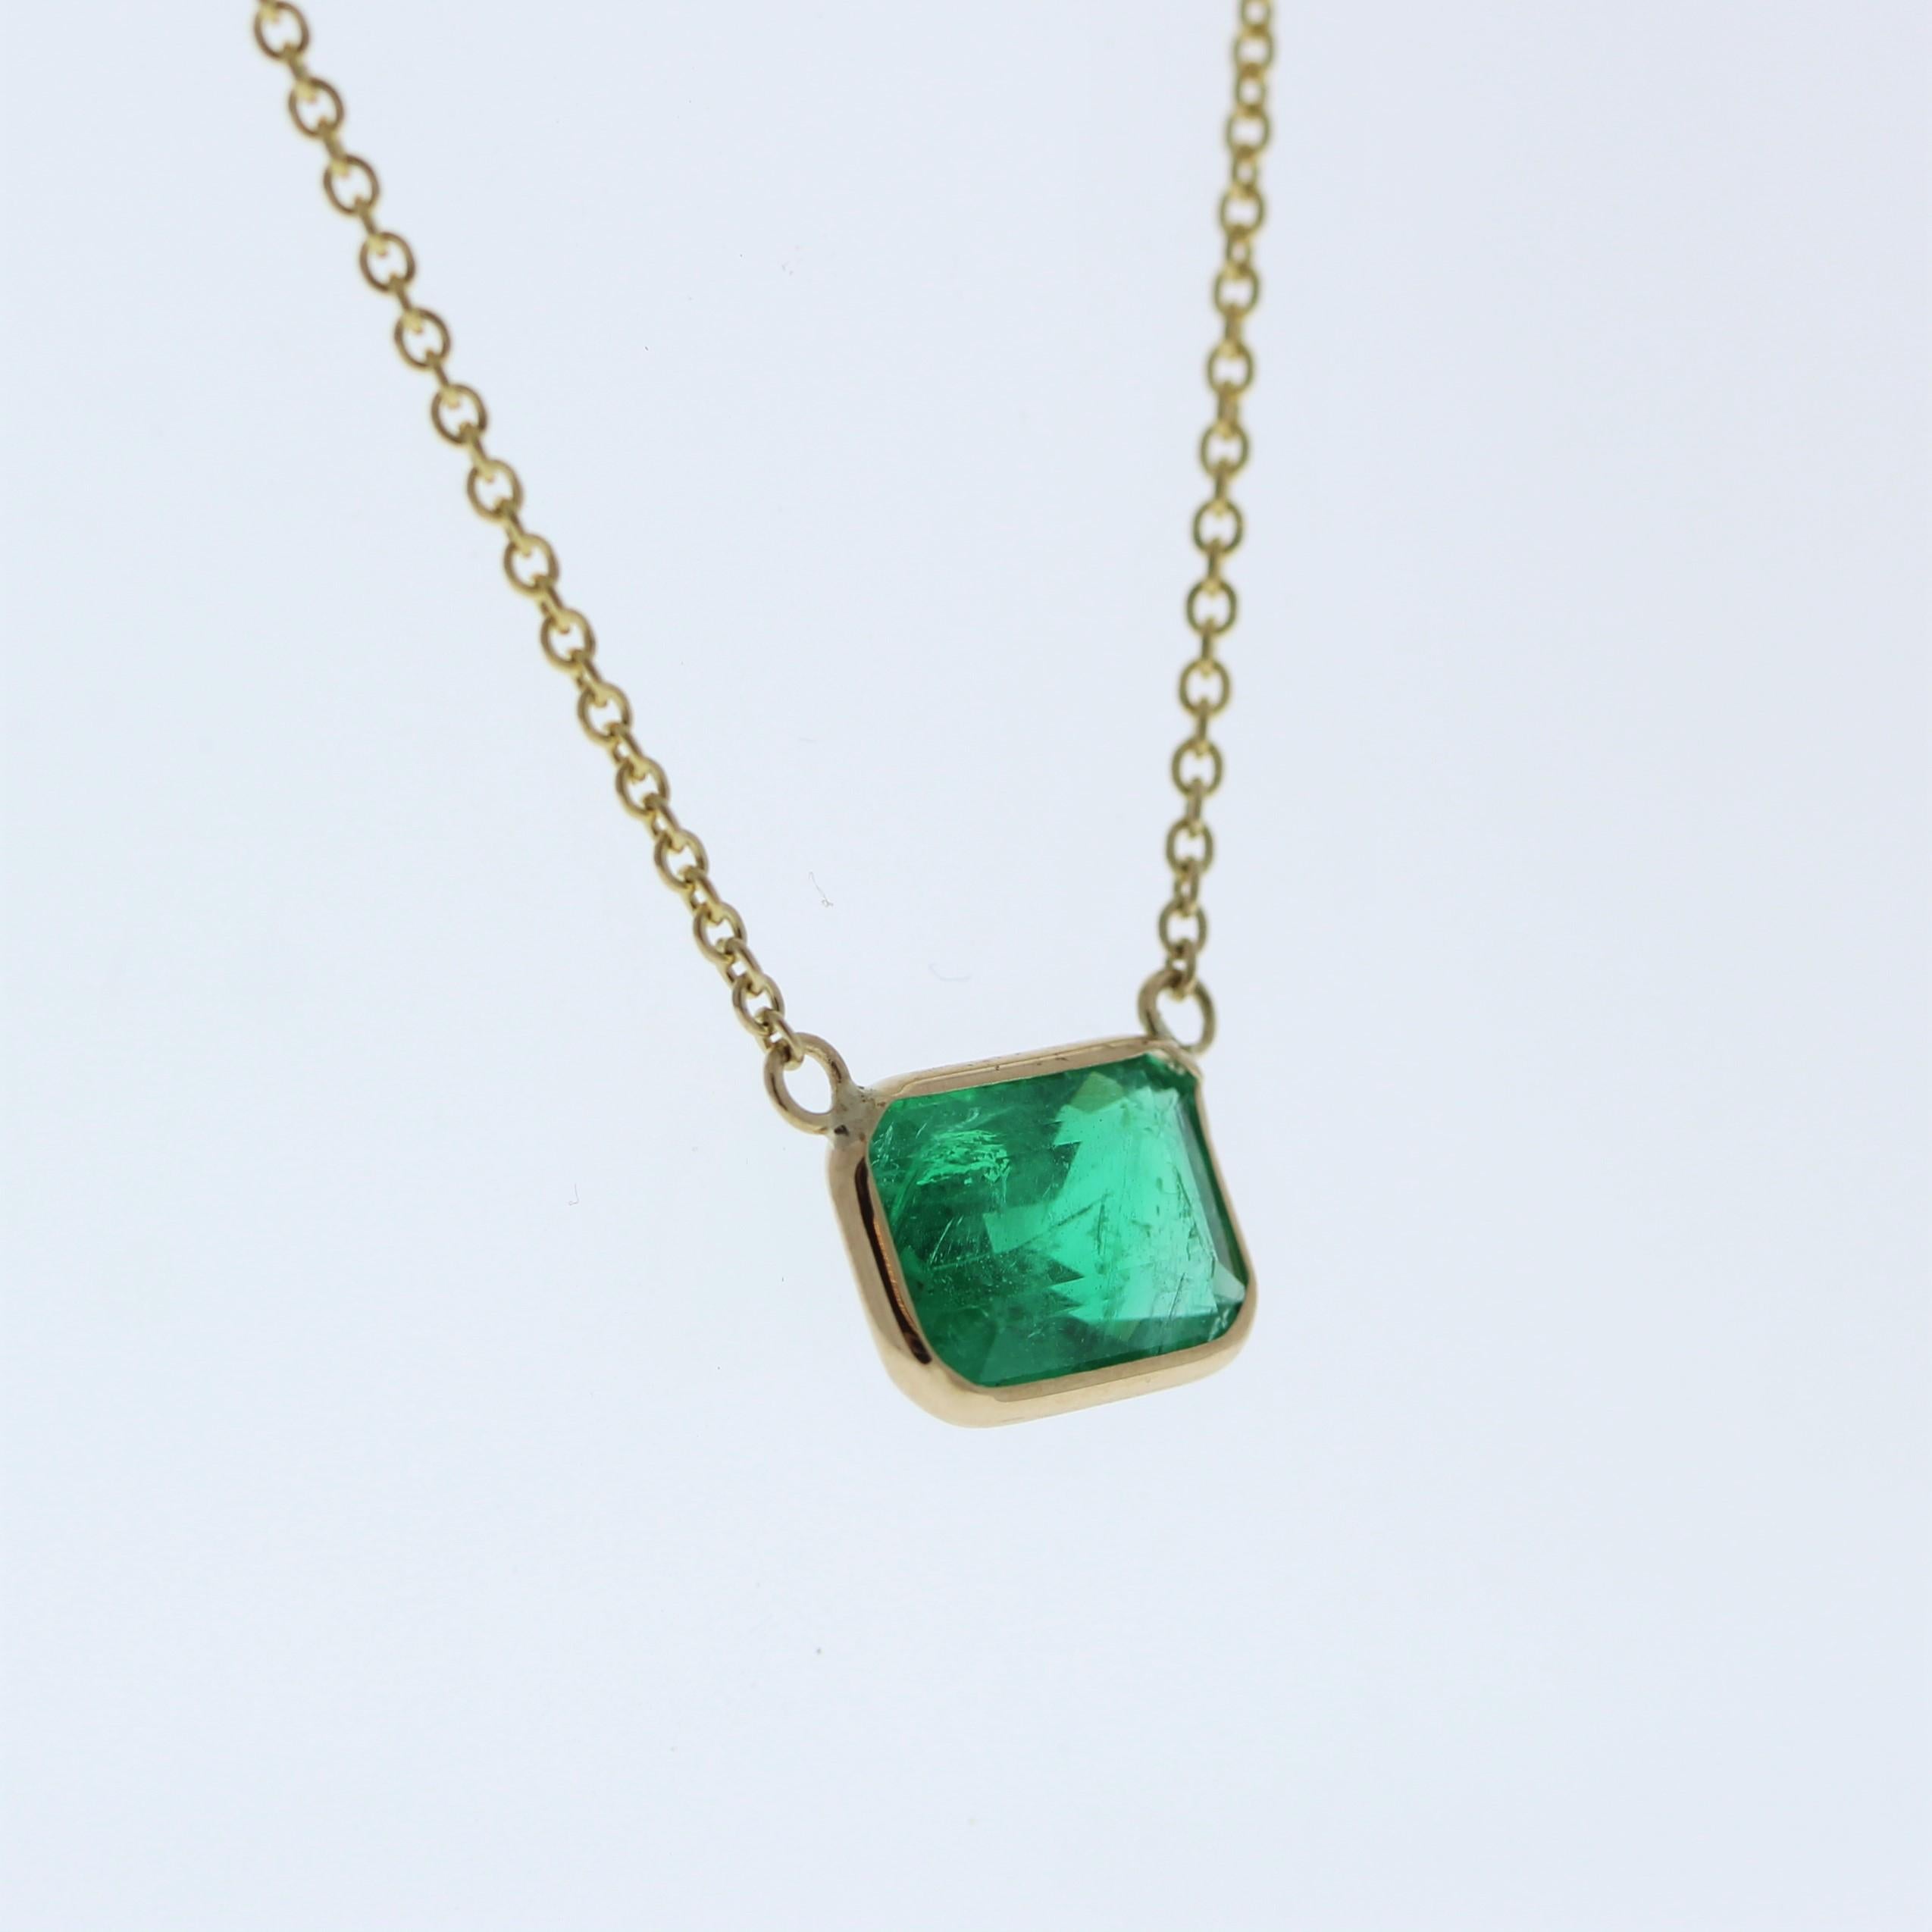 The necklace features a 1.97-carat emerald-cut emerald set in a 14 karat yellow gold pendant or setting. The emerald cut and the rich green color of the emerald against the yellow gold setting are likely to create an elegant and eye-catching fashion